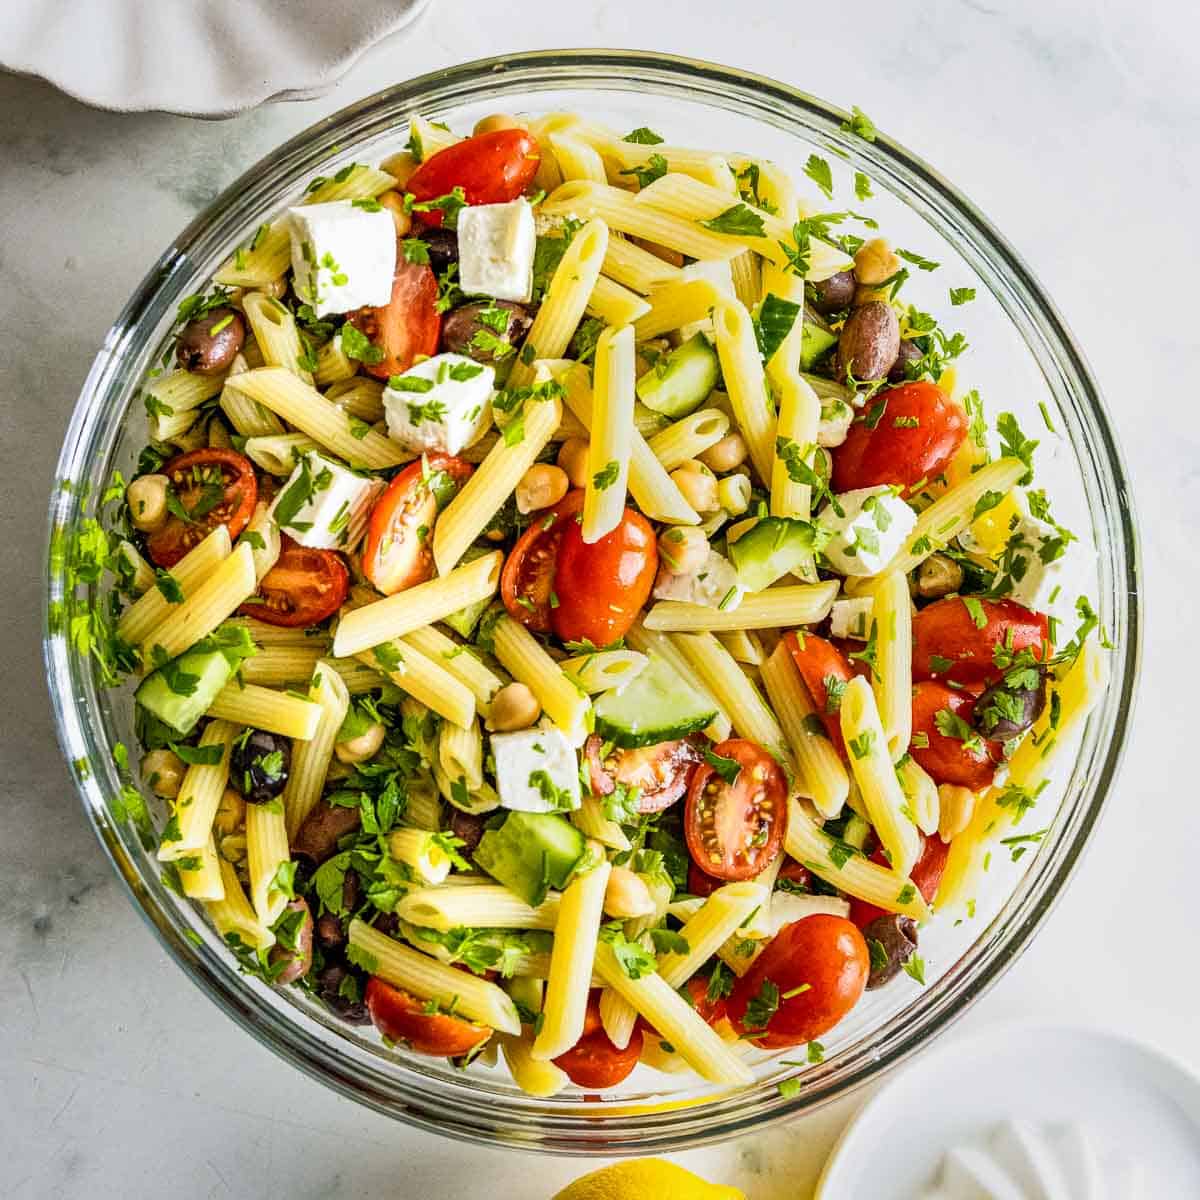 Overhead shot of pasta salad garnished with basil in a large clear bowl on a marble table.